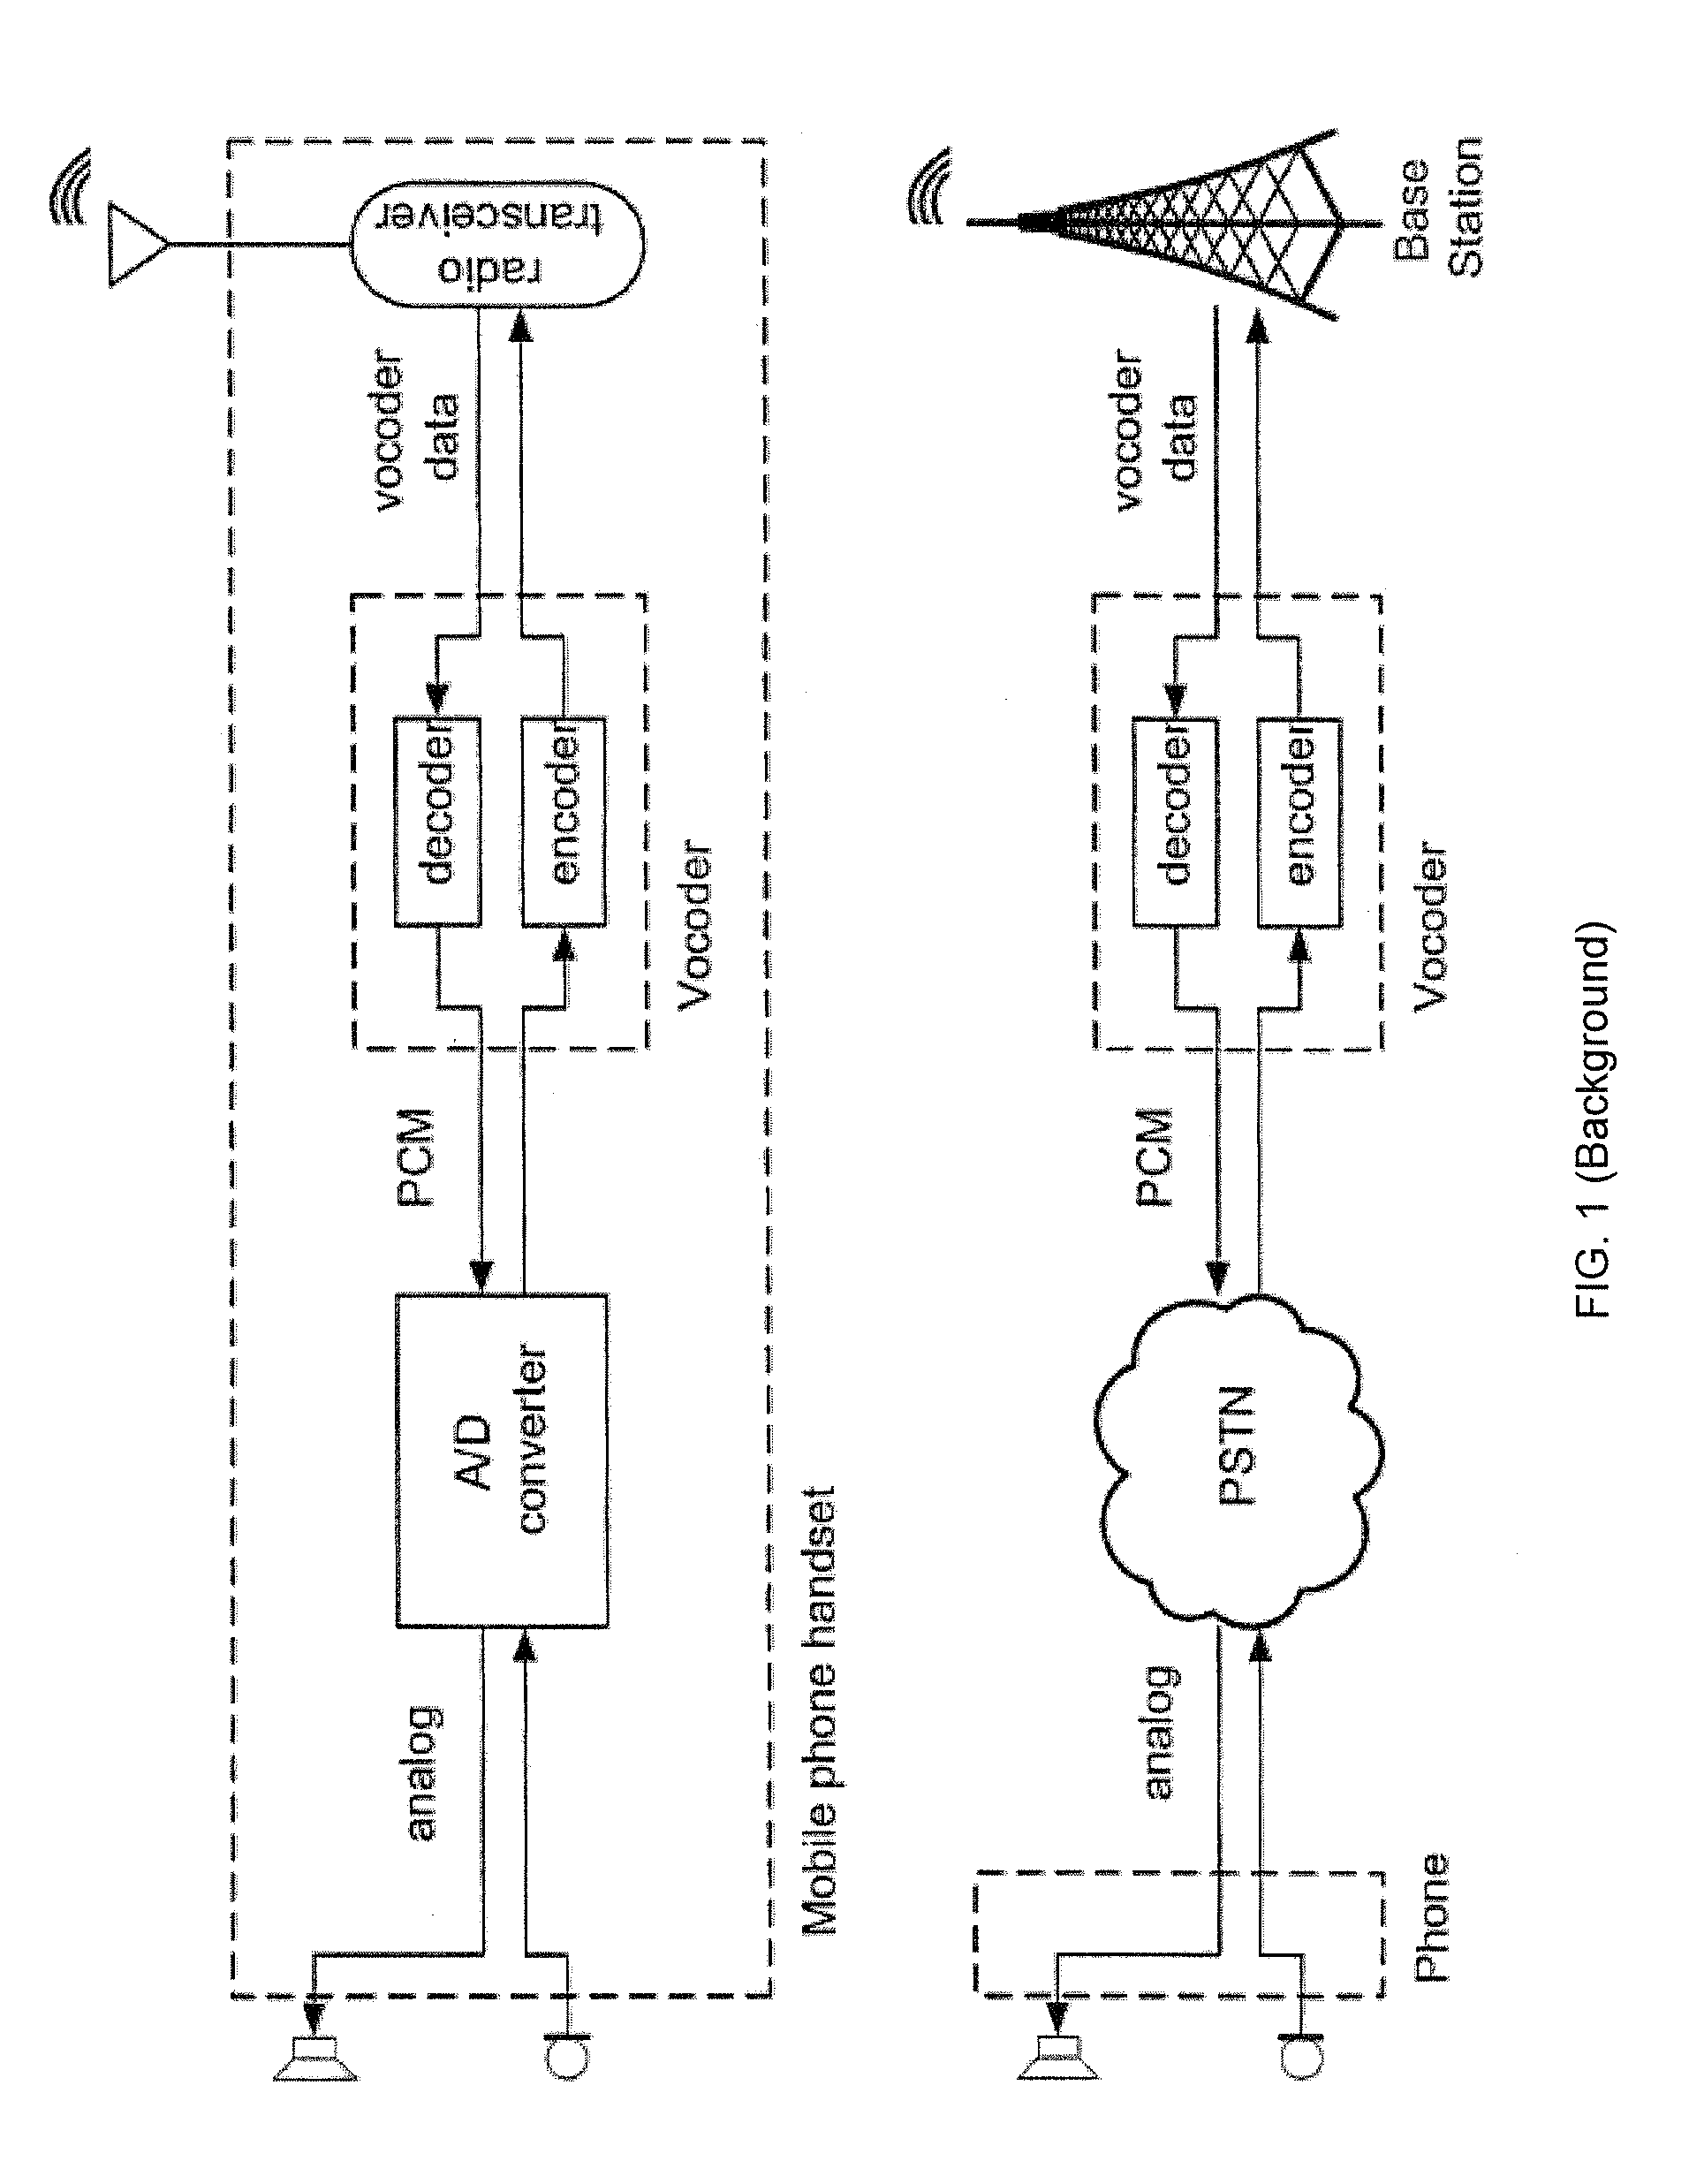 Adaptive data transmission for a digital in-band modem operating over a voice channel